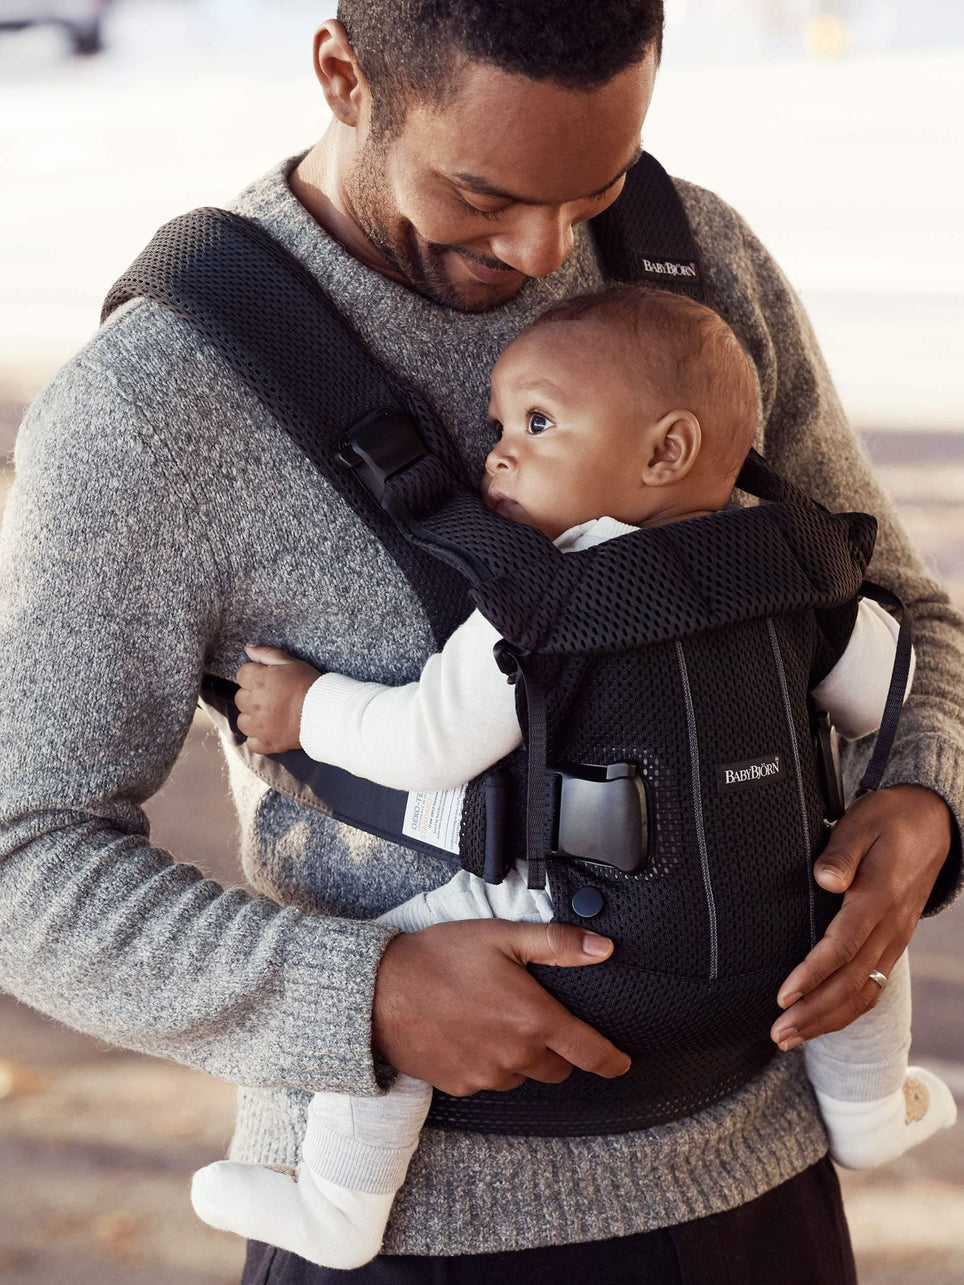 Shop Baby Bjorn One Air 3D Mesh Baby Carrier Online at Kiddie Country™️